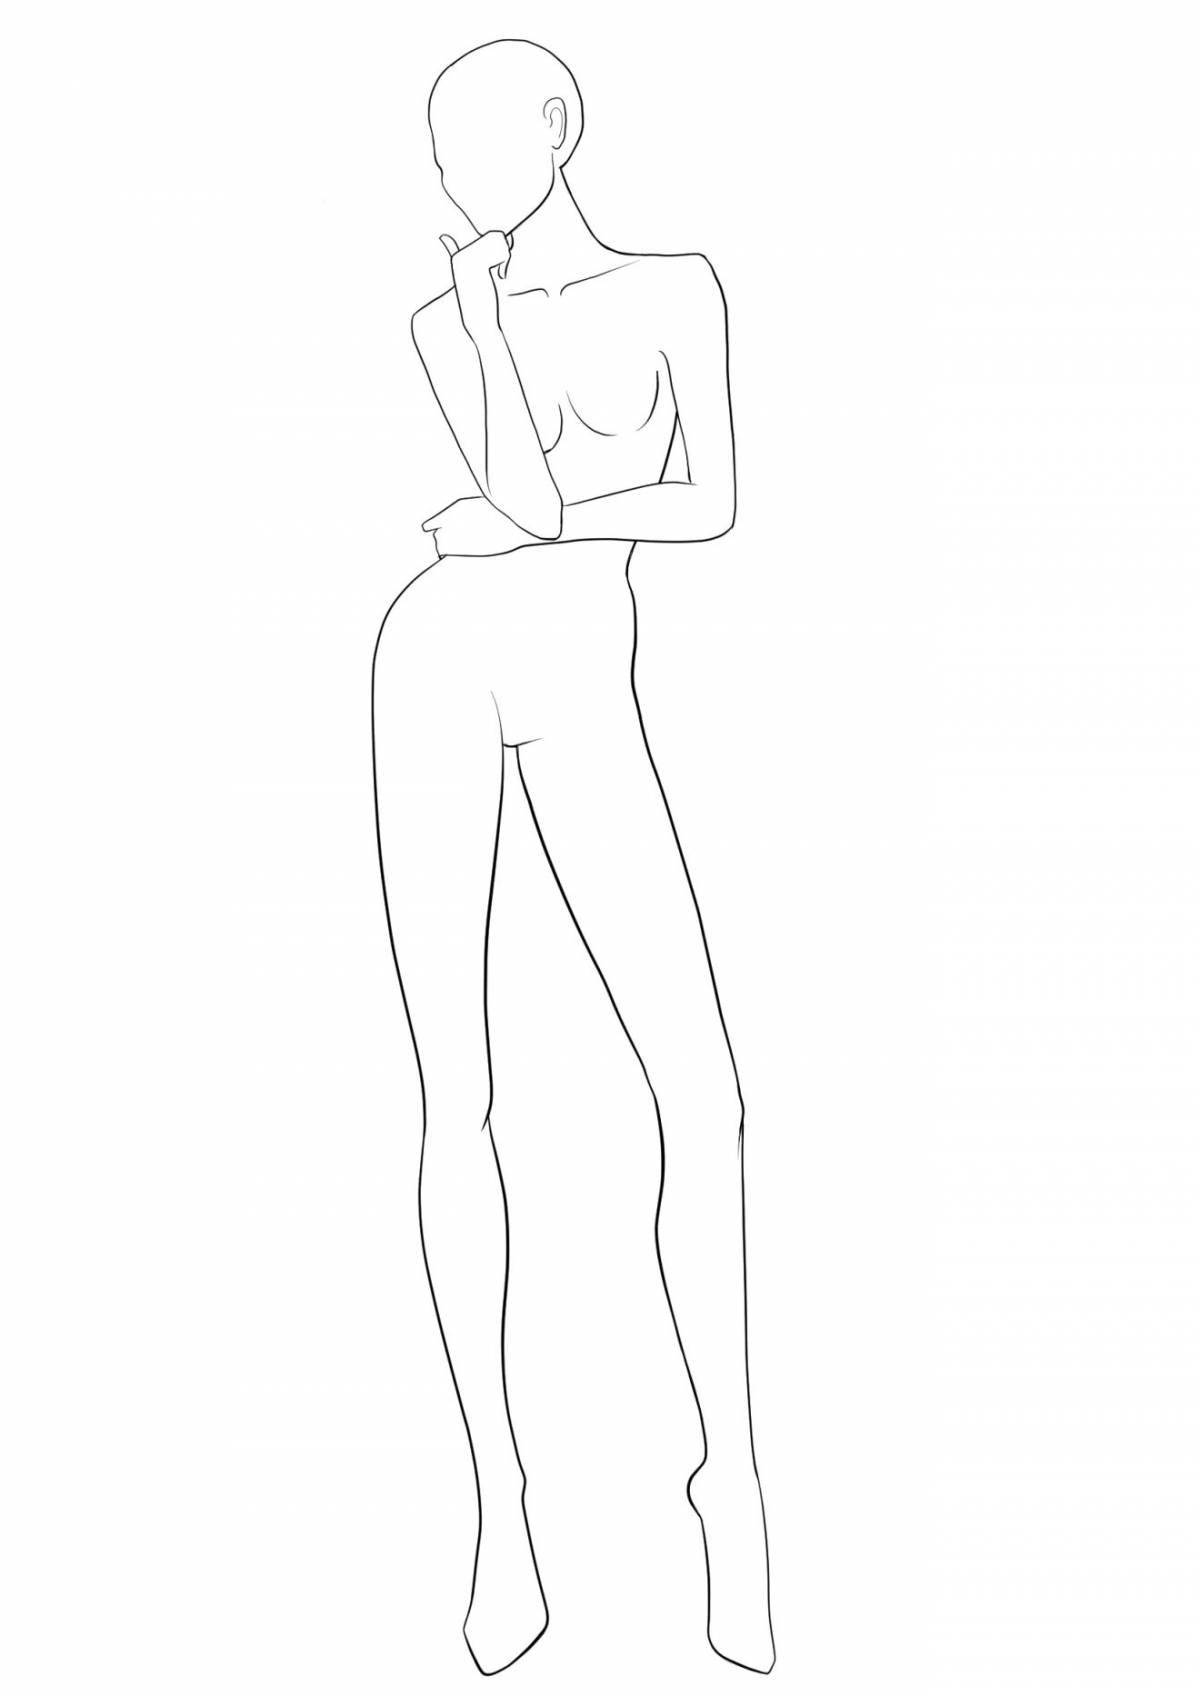 Coloring book playful girl mannequin